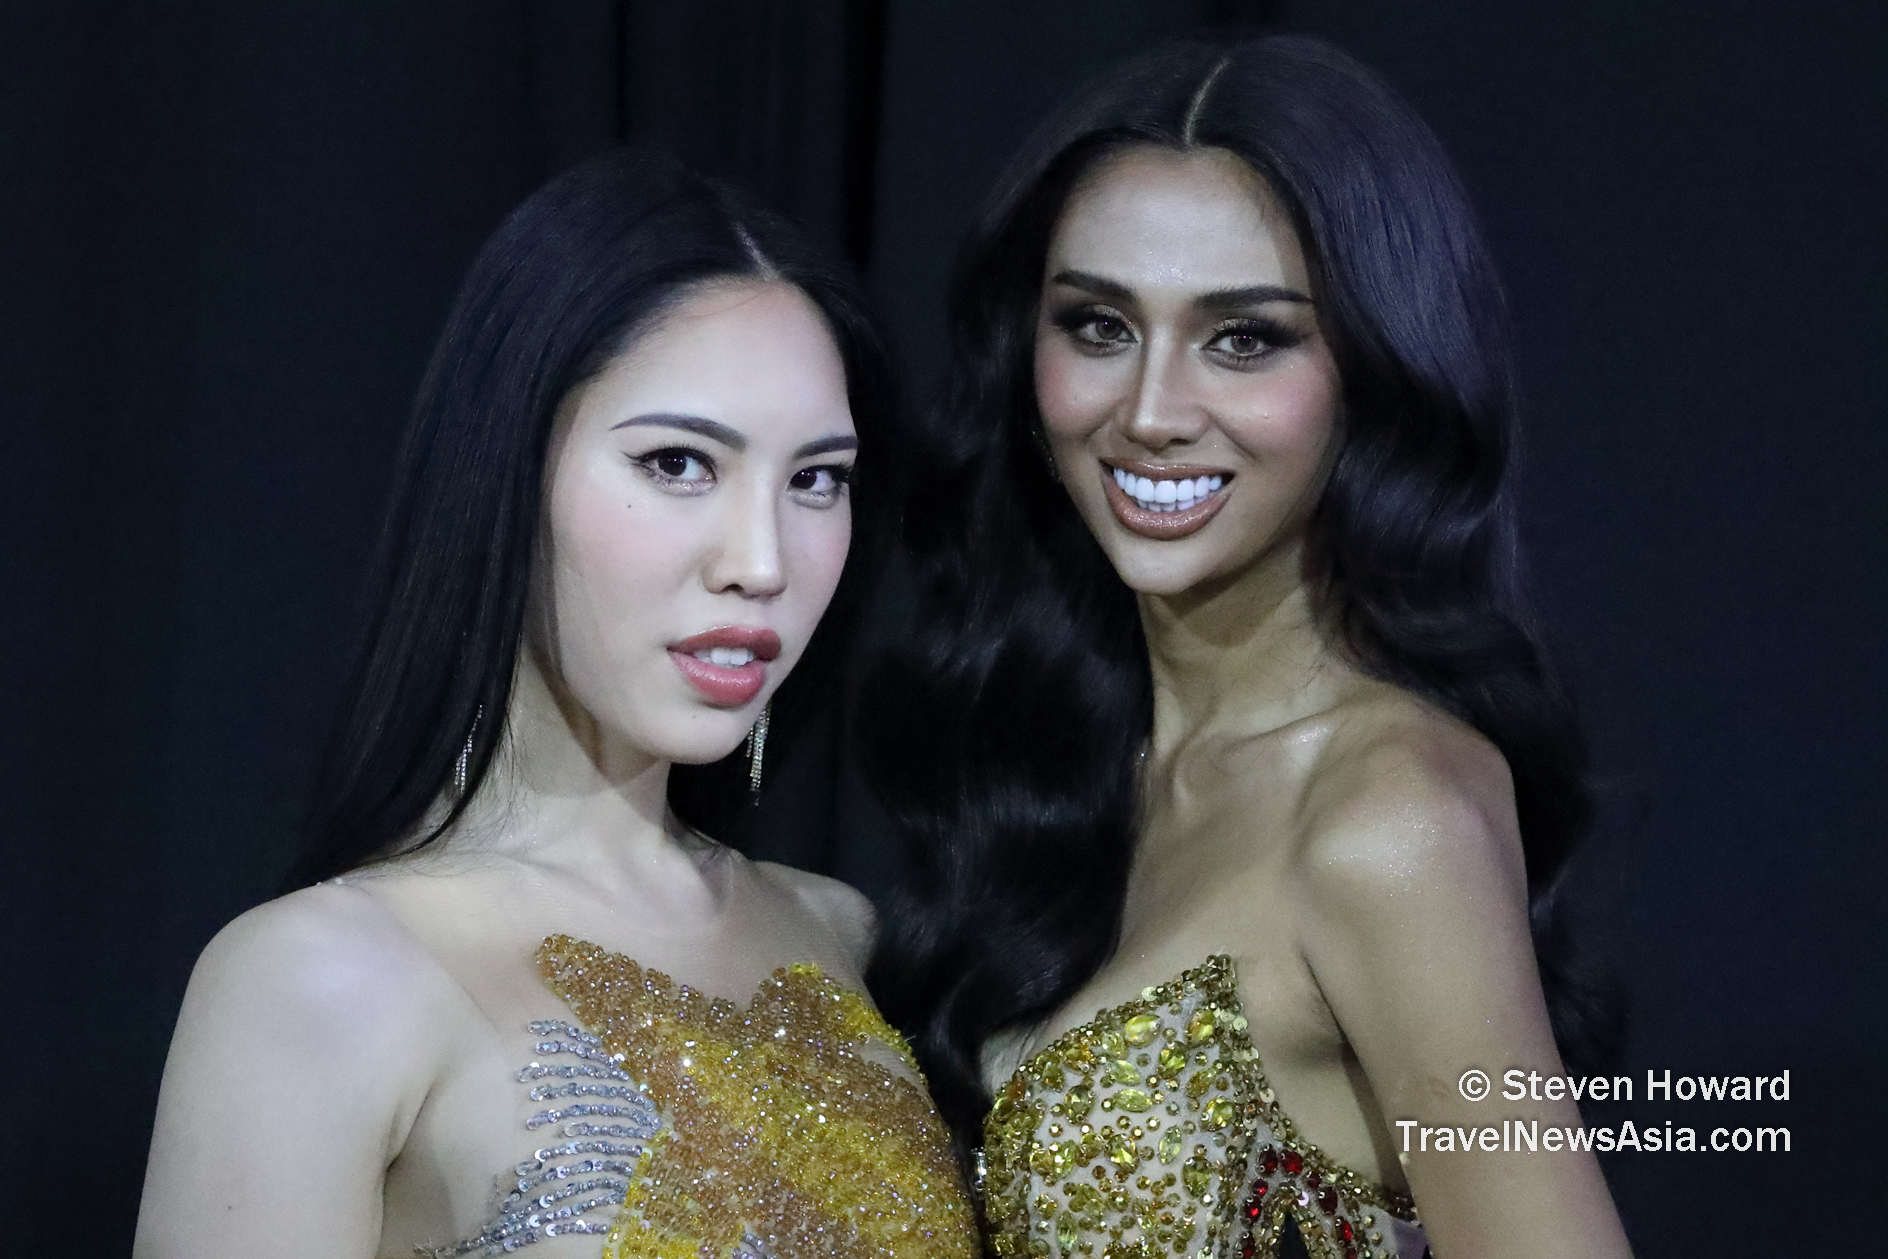 Pictures from Miss International Queen 2023 Transgender Beauty Pageant in Pattaya, Thailand. Pictures by Steven Howard of TravelNewsAsia.com